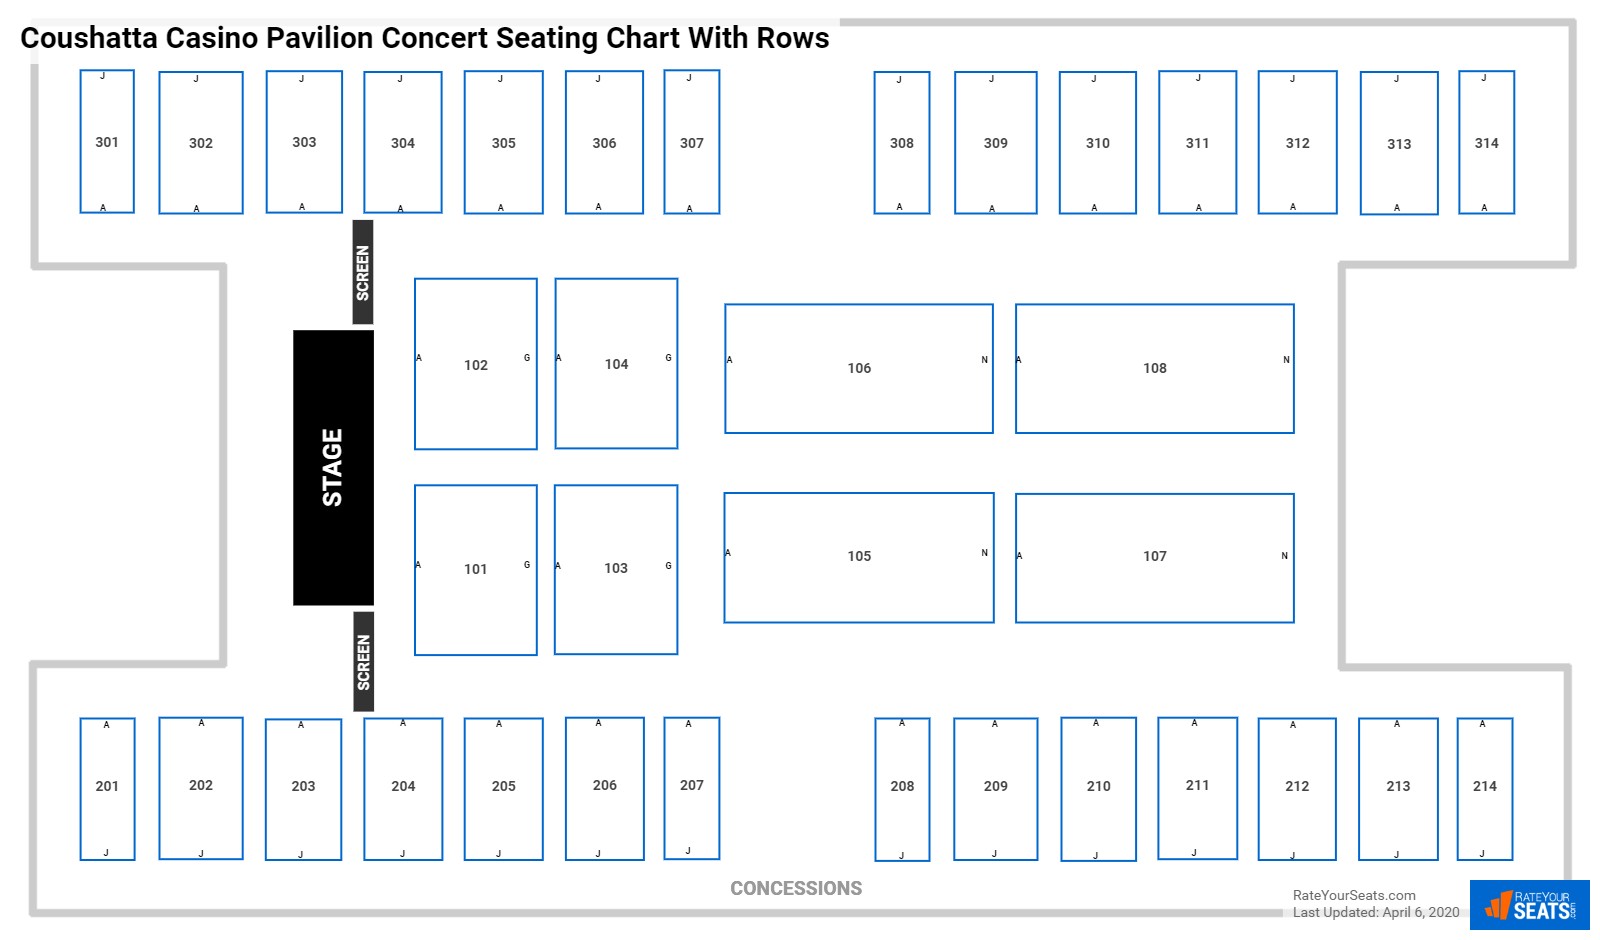 Coushatta Casino Pavilion seating chart with row numbers